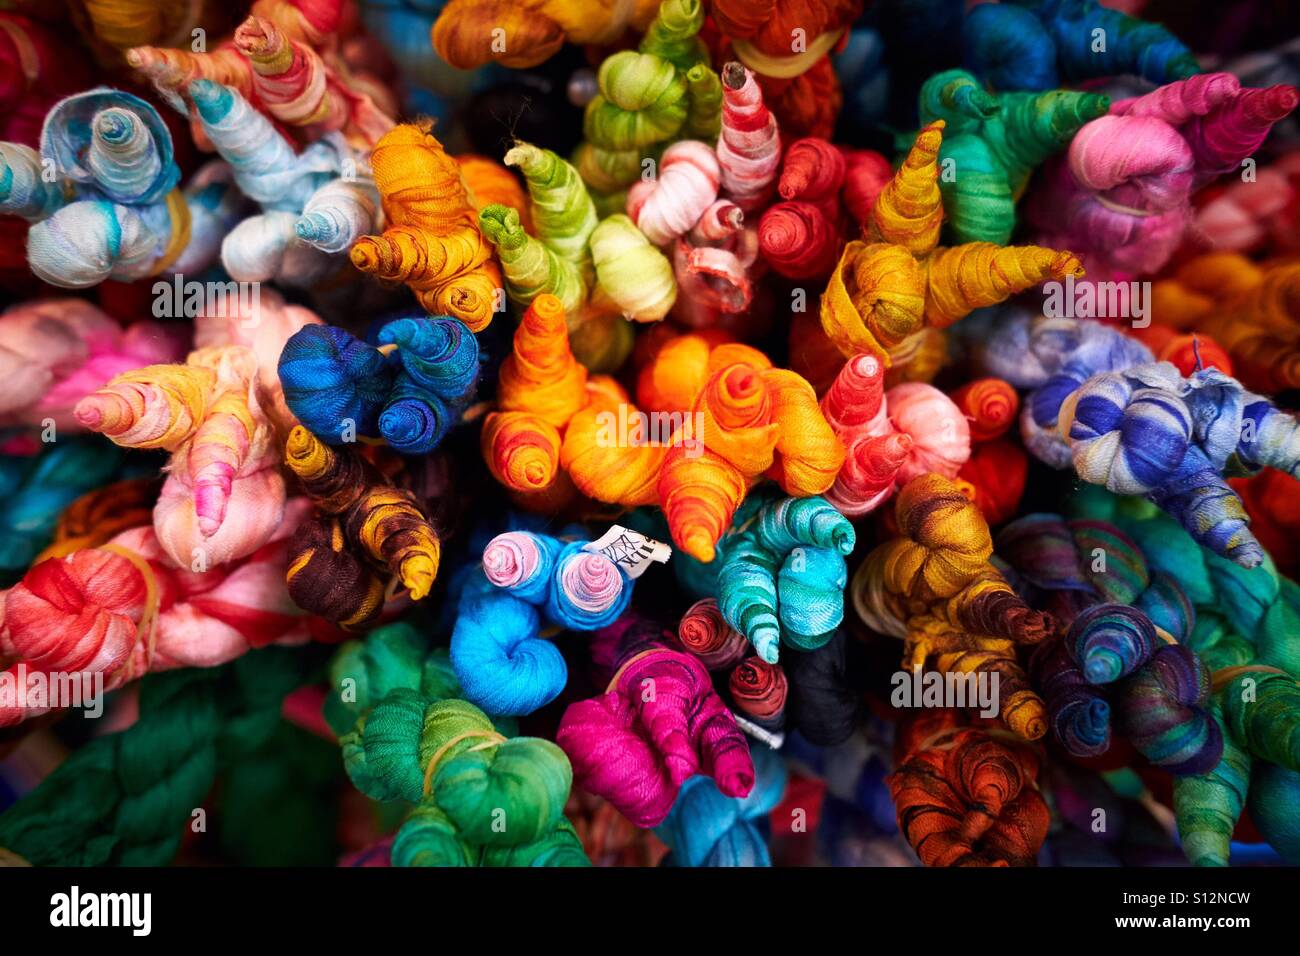 Colourful selection of twisted silk scarves packed together. Stock Photo